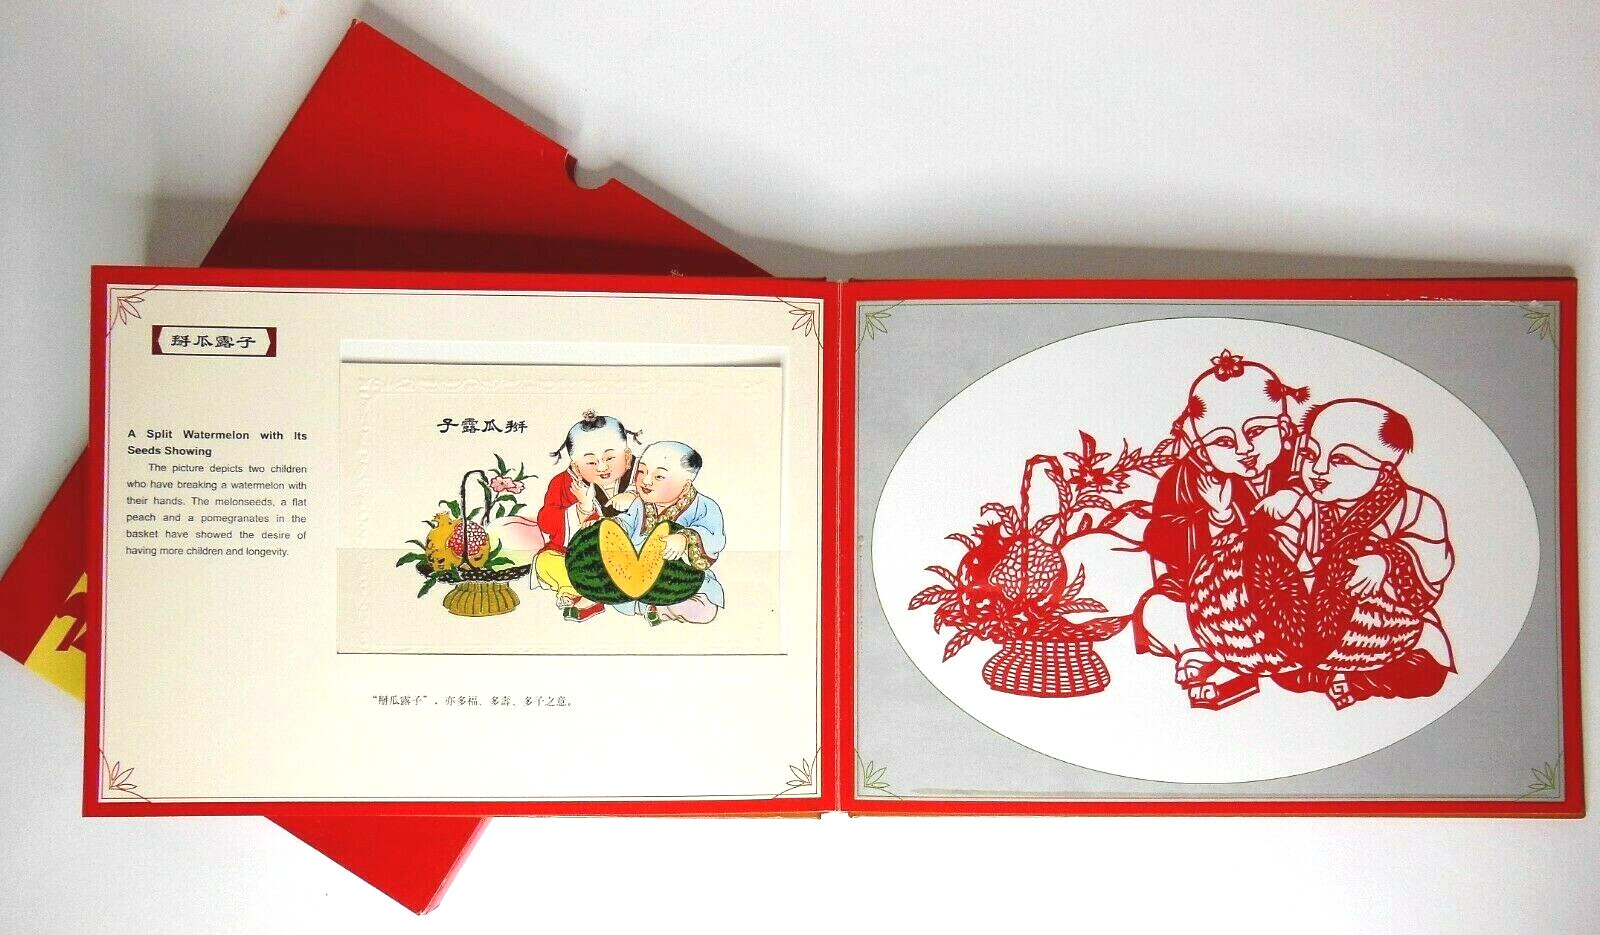 Tianjin Yangliuqing New Year Picture Paper Cut In China 6 Color Prints HC Book